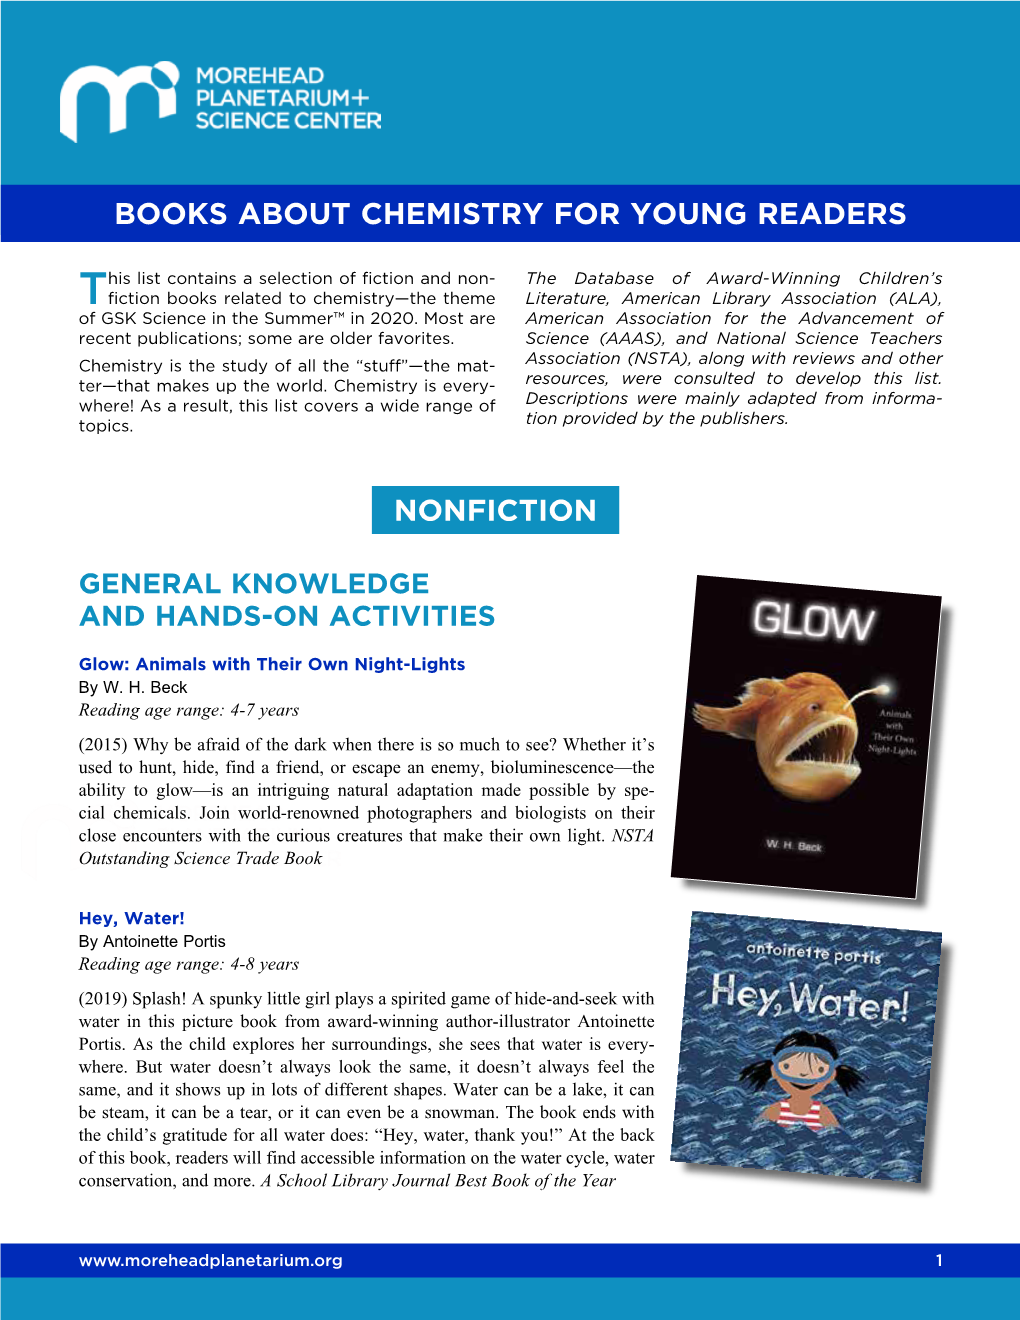 Books About Chemistry for Young Readers Nonfiction